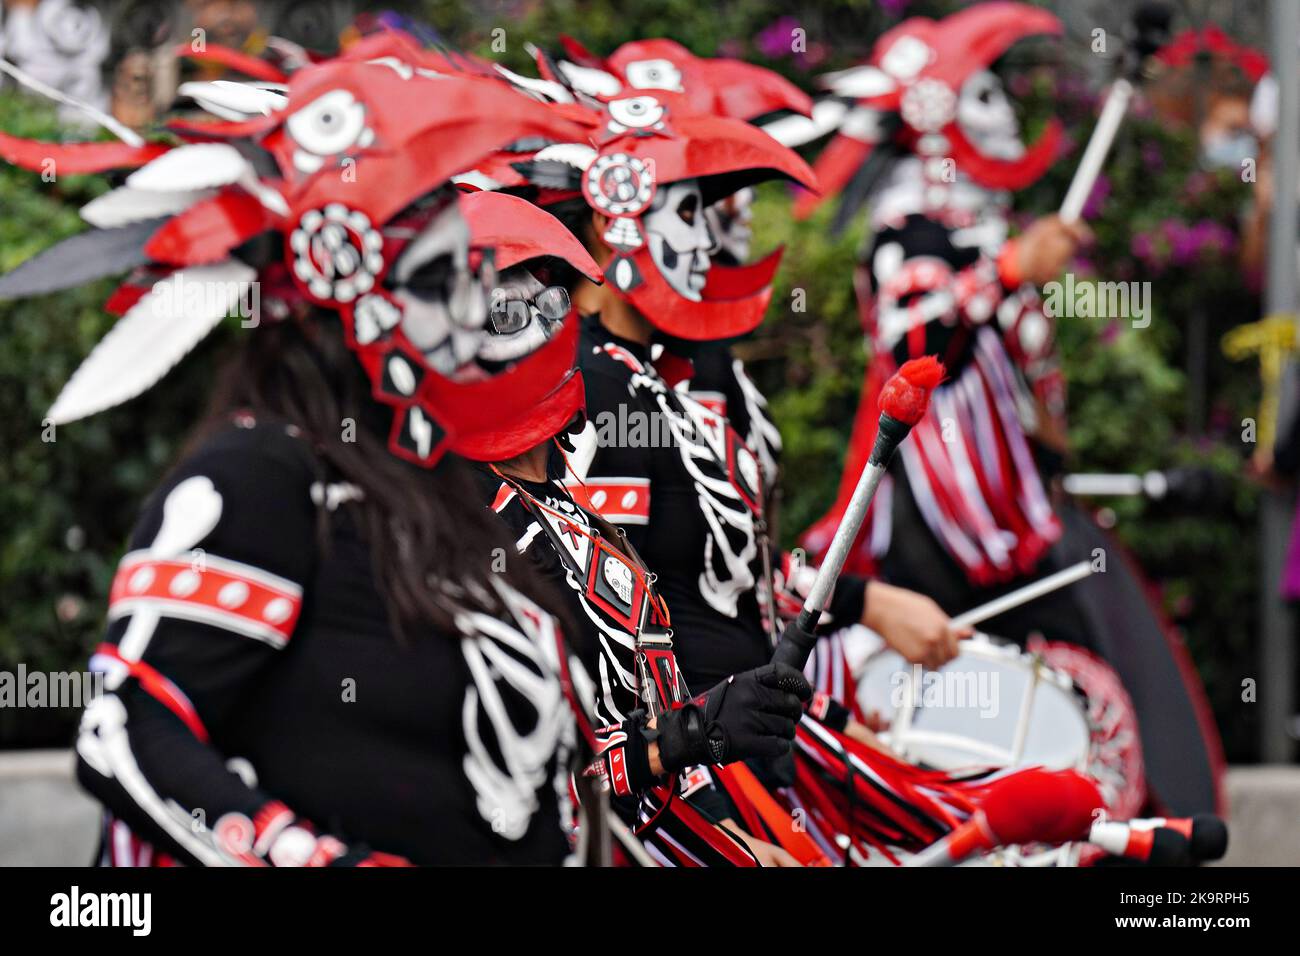 Mexico City, Mexico. 29th Oct, 2022. A marching band from England dressed in skeleton costumes perform at the Grand Parade of the Dead to celebrate Dia de los Muertos holiday on Paseo de la Reforma, October 29, 2022 in Mexico City, Mexico. Credit: Richard Ellis/Richard Ellis/Alamy Live News Stock Photo